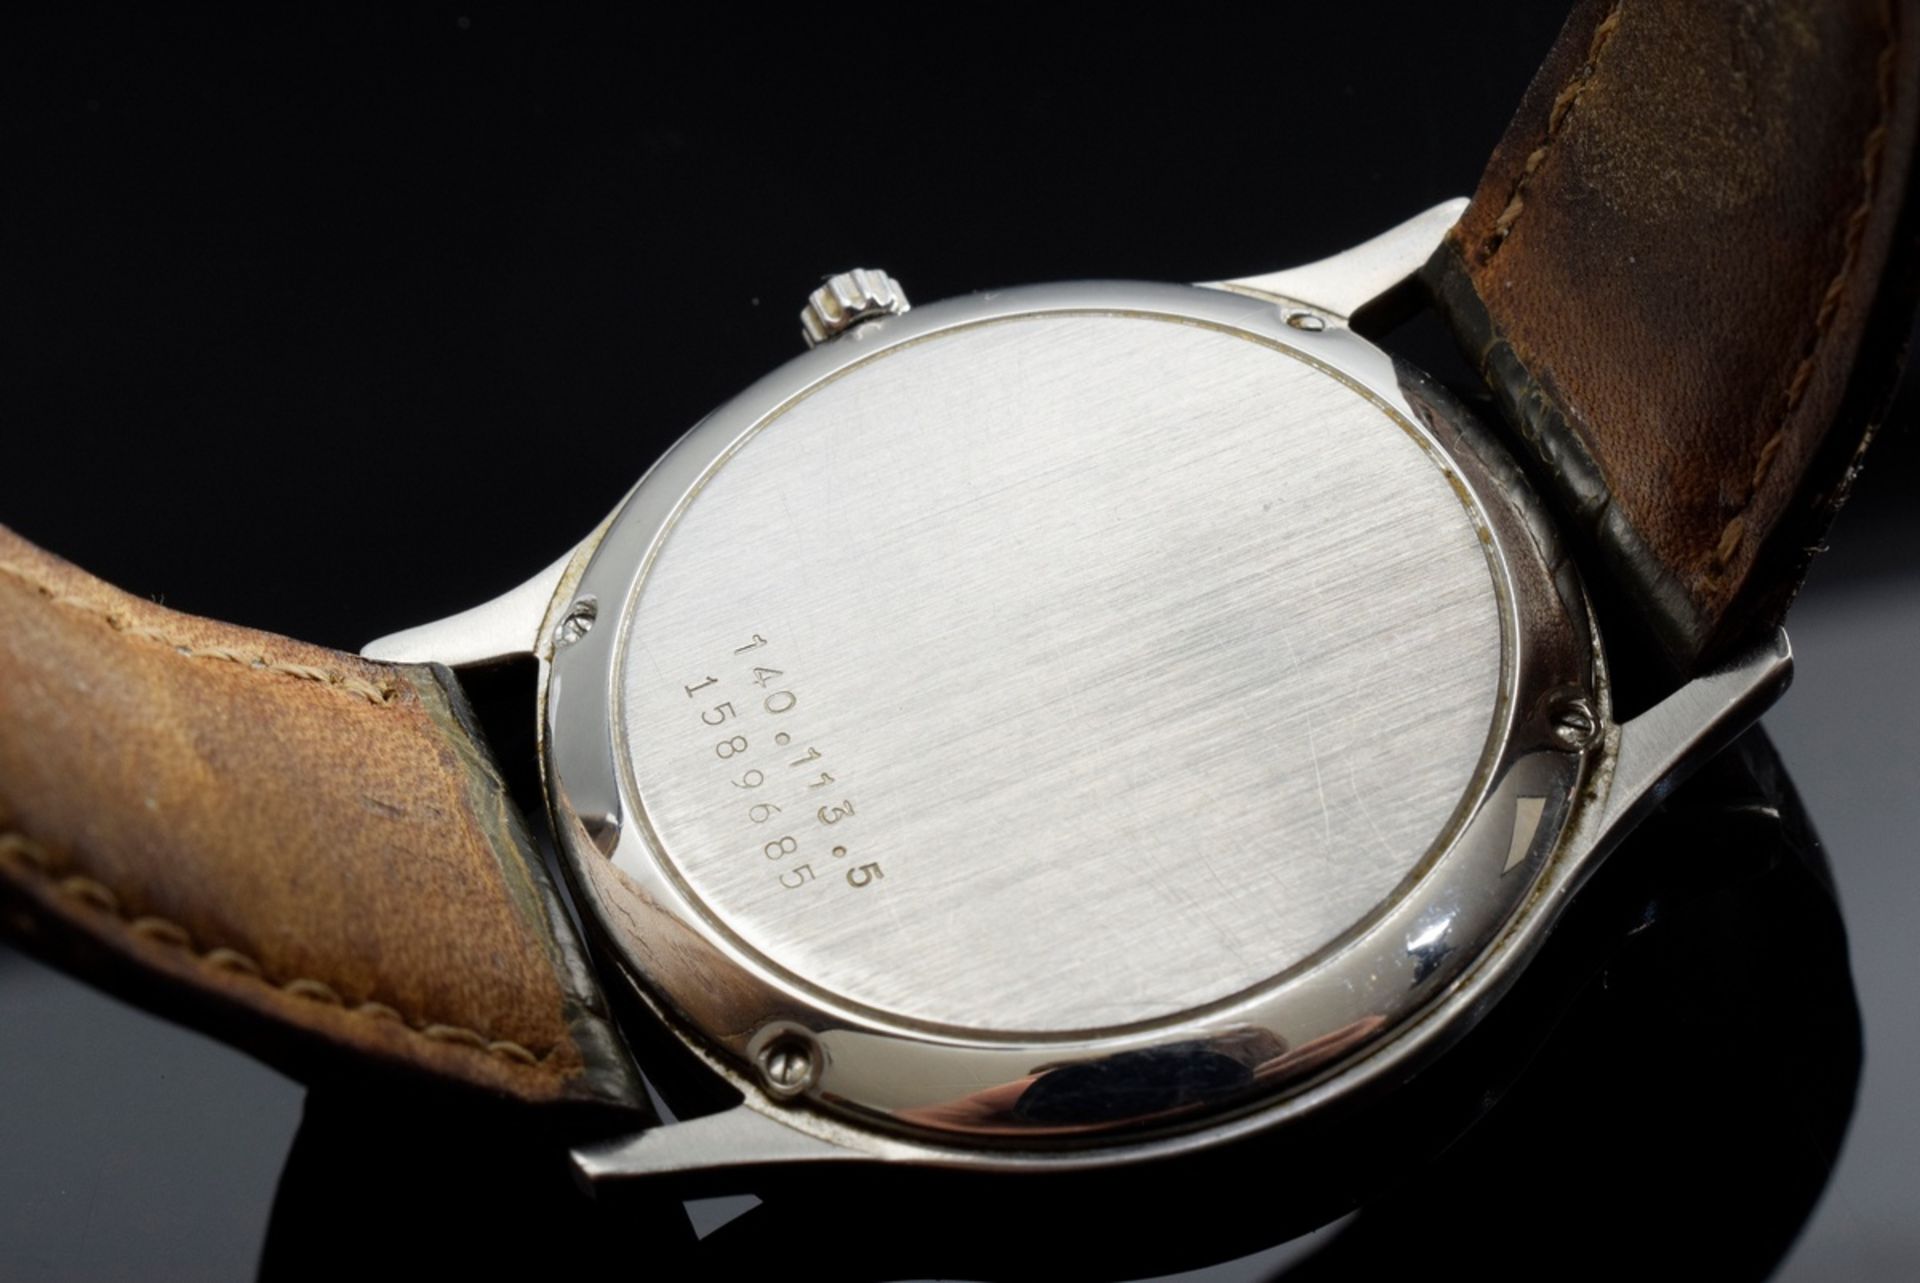 Jaeger-LeCoultre steel men's wristwatch, quartz movement, large seconds, date, hour and minute indi - Image 3 of 4